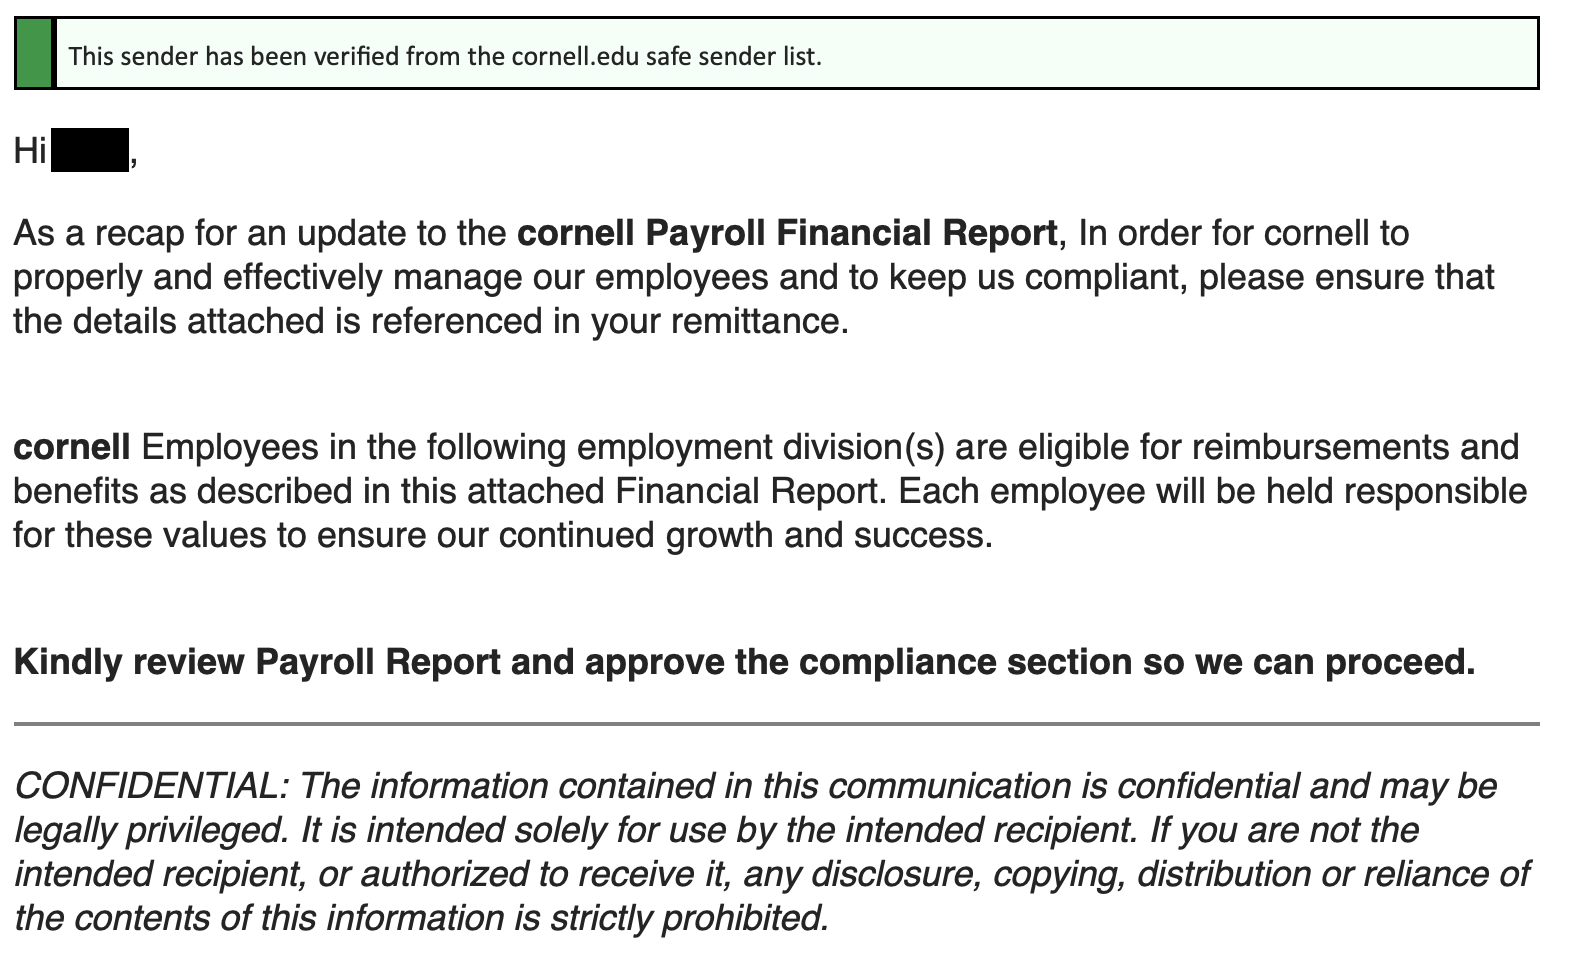 A fake payroll notification prompting the recipient to "Kindly review Payroll Report and approve the compliance section so we can proceed"